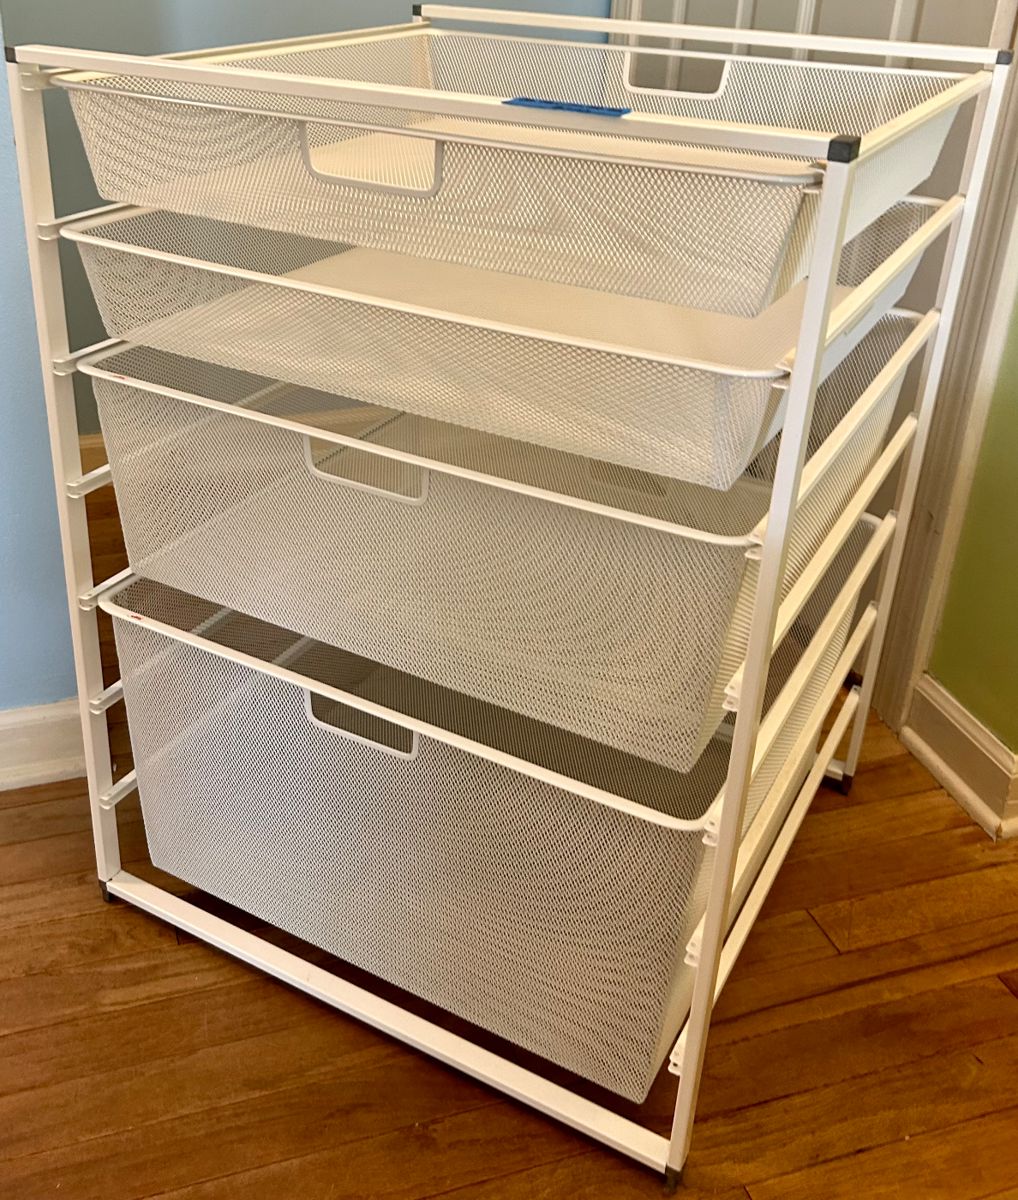 Elfa 7 runner wide basket system with 4 tight mesh drawers 22w x 21d x 29.25”h $60